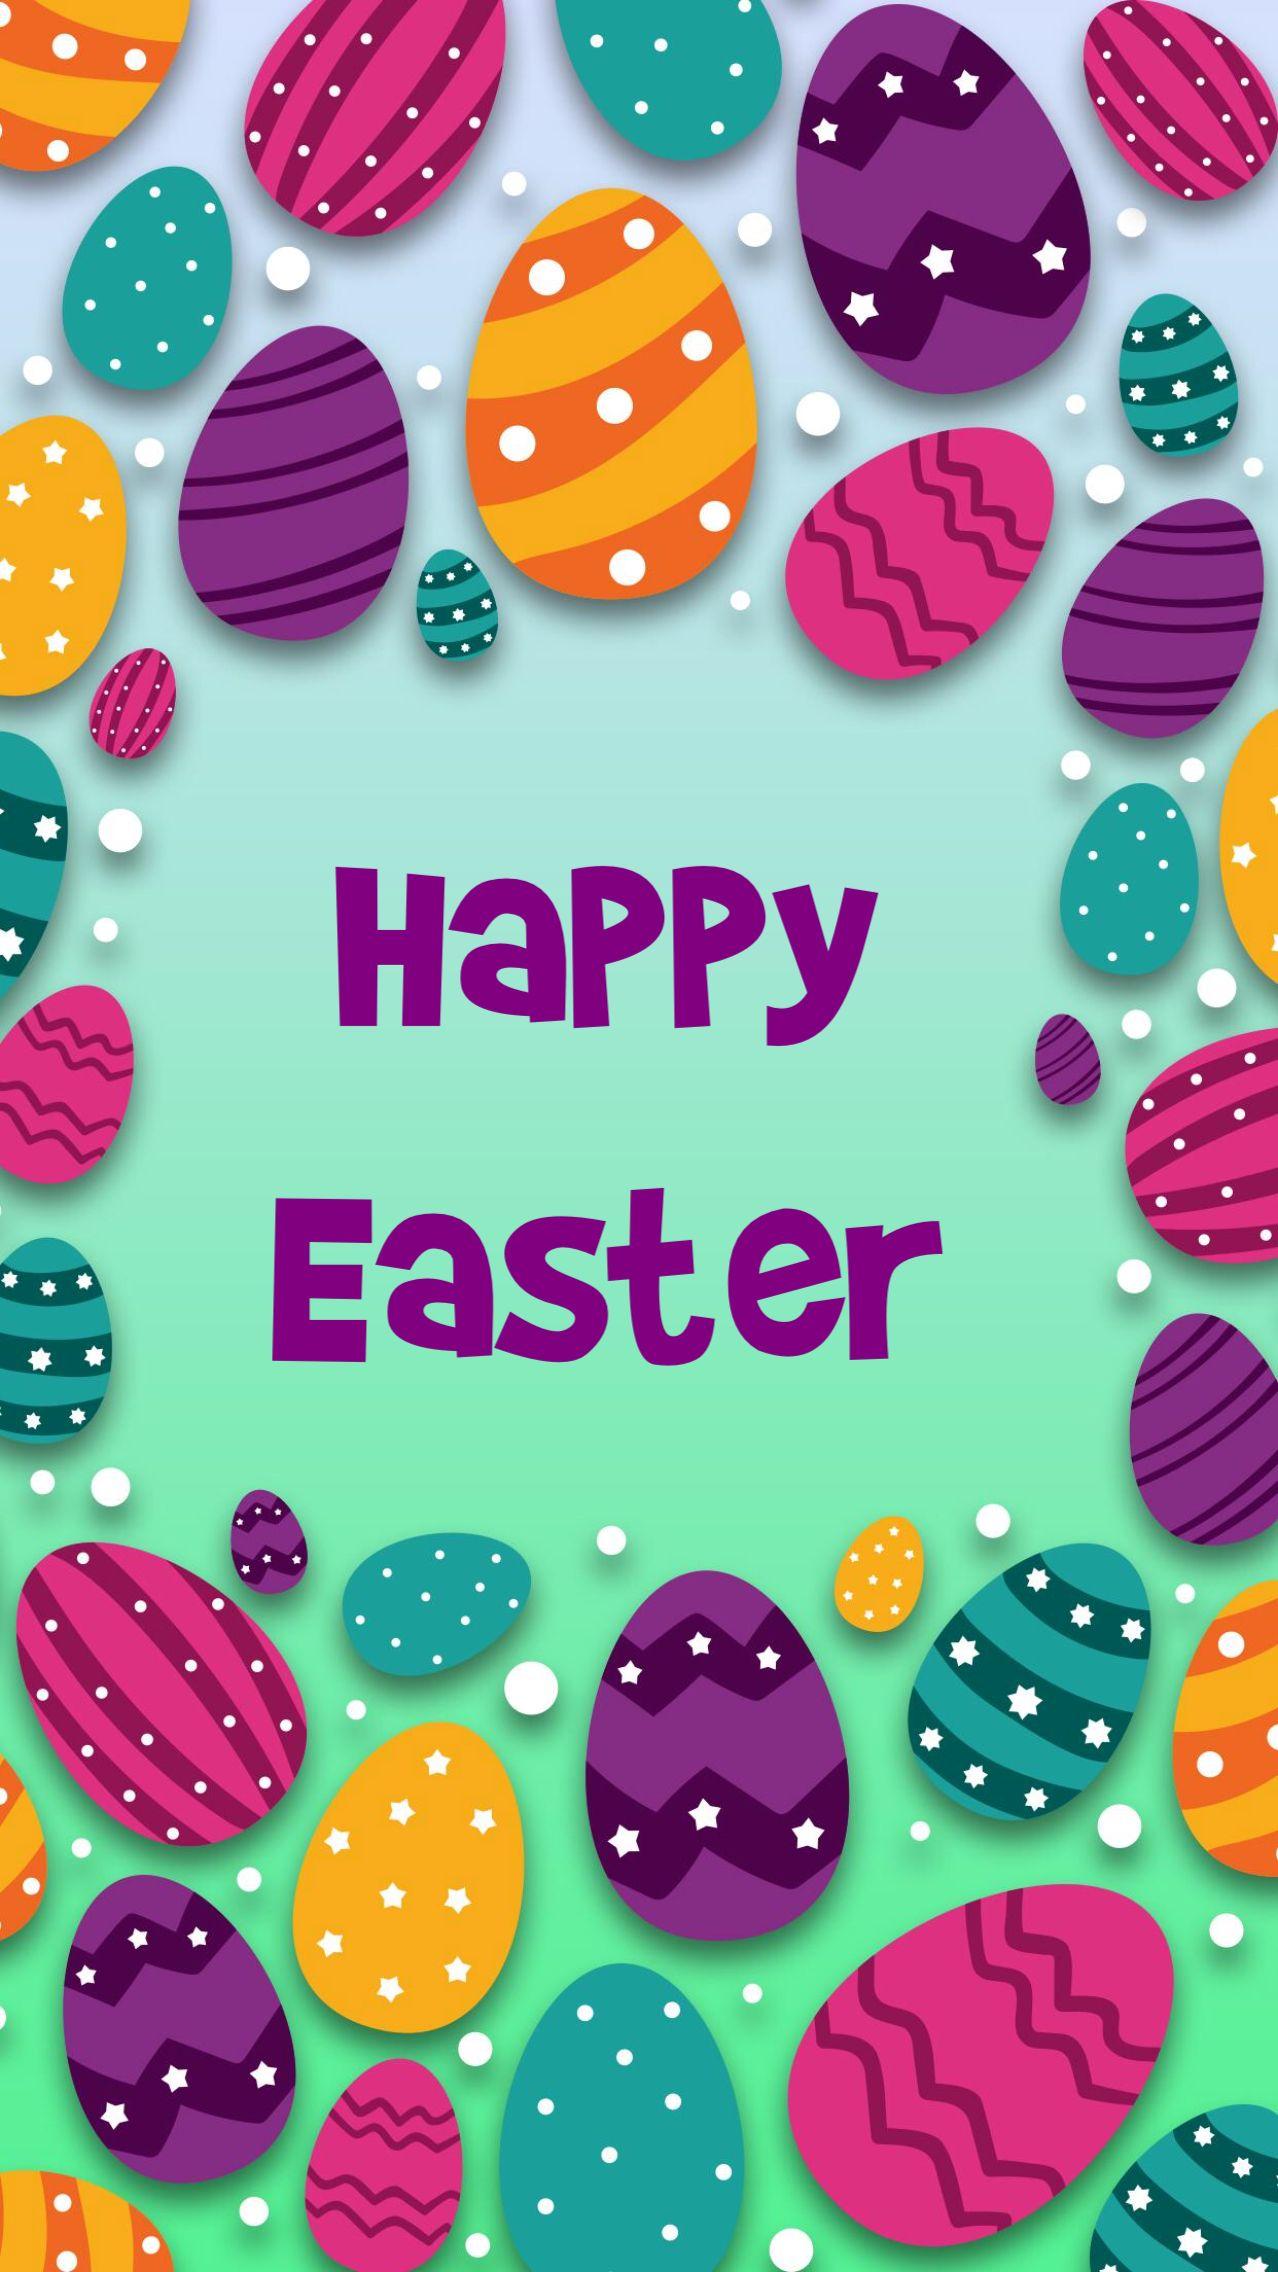 iPhone Wall: Easter tjn. Happy easter wallpaper, Easter